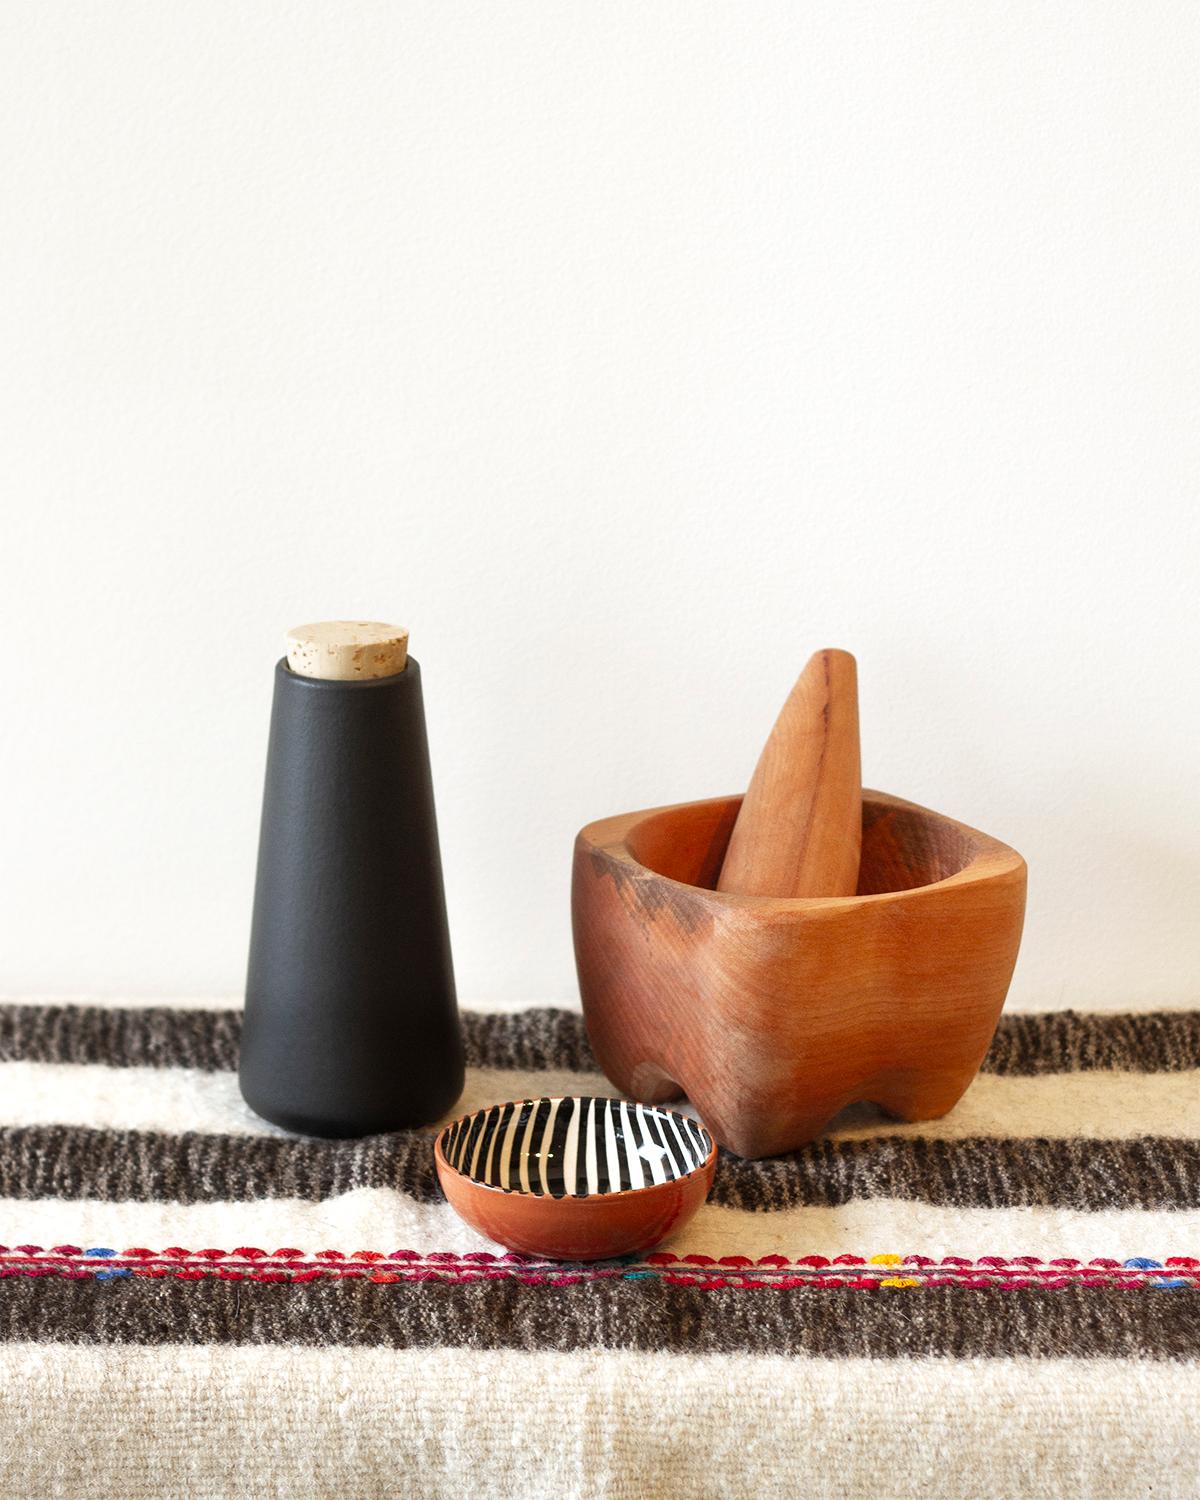 This beautiful Rauli Hand Carved Solid Wood Mortar and Pestle is crafted from solid wood, creating a warm, natural look perfect for any rustic or organic-modern kitchen. Its minimalist, artisanal design makes this cooking tool the perfect practical